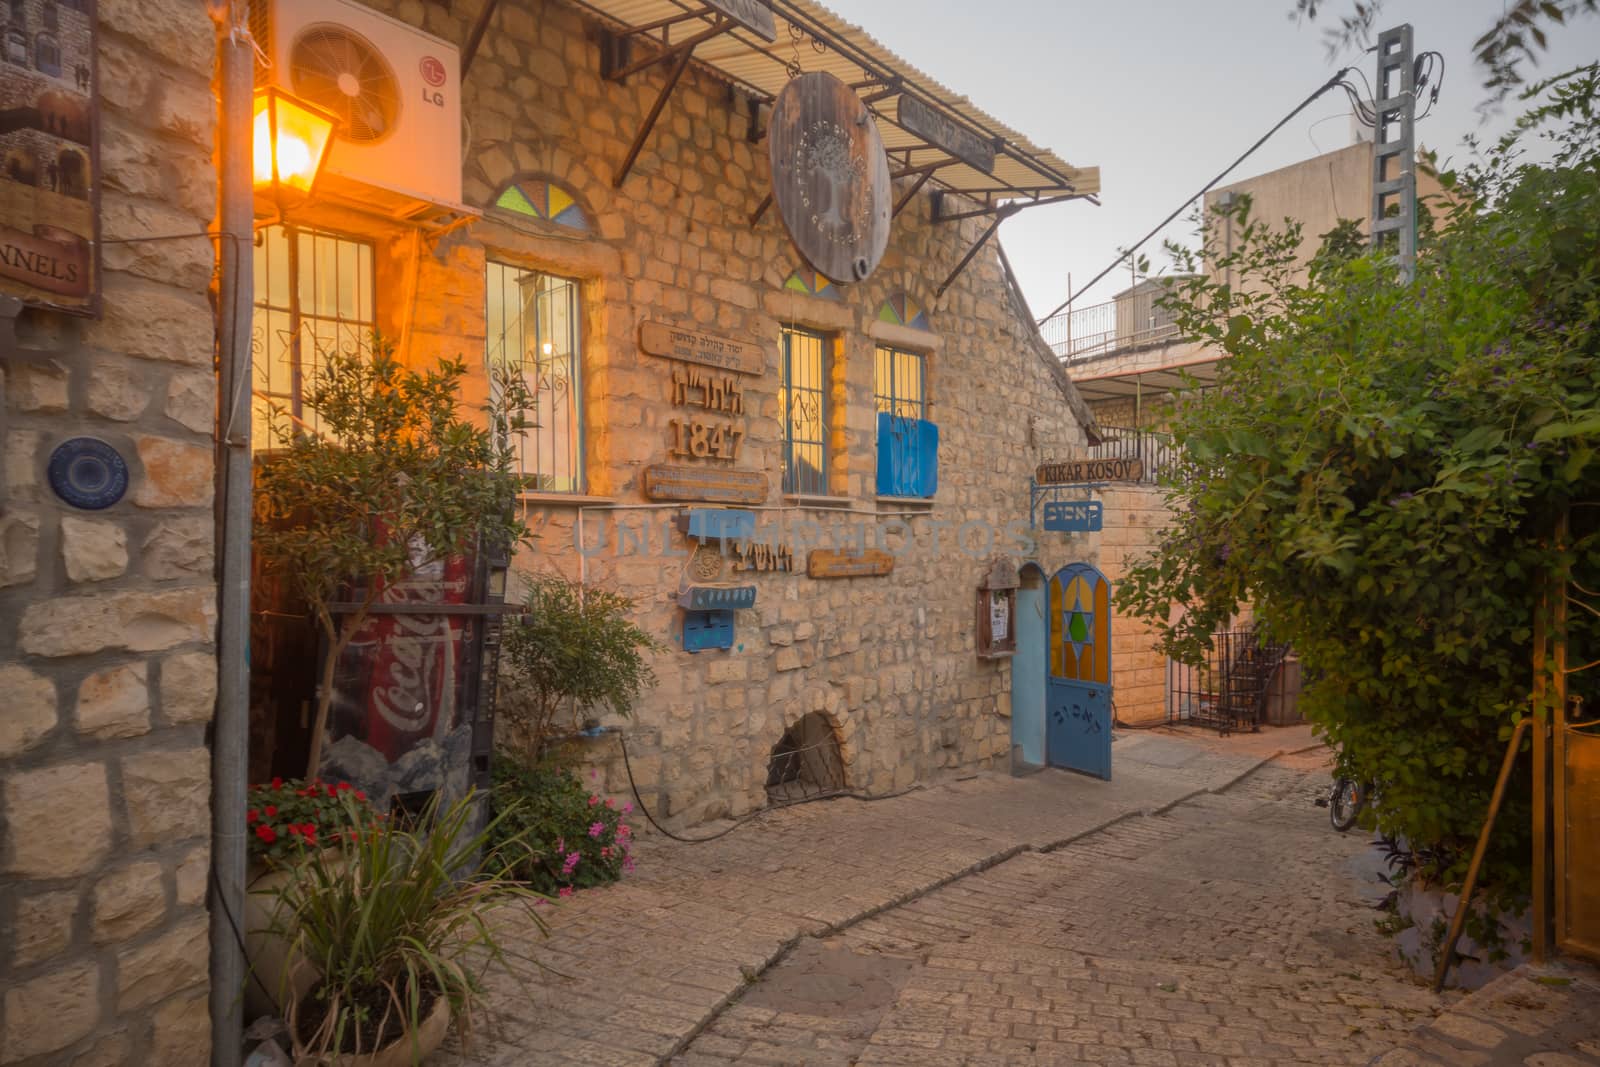 Alley with various signs, in Safed (Tzfat) by RnDmS